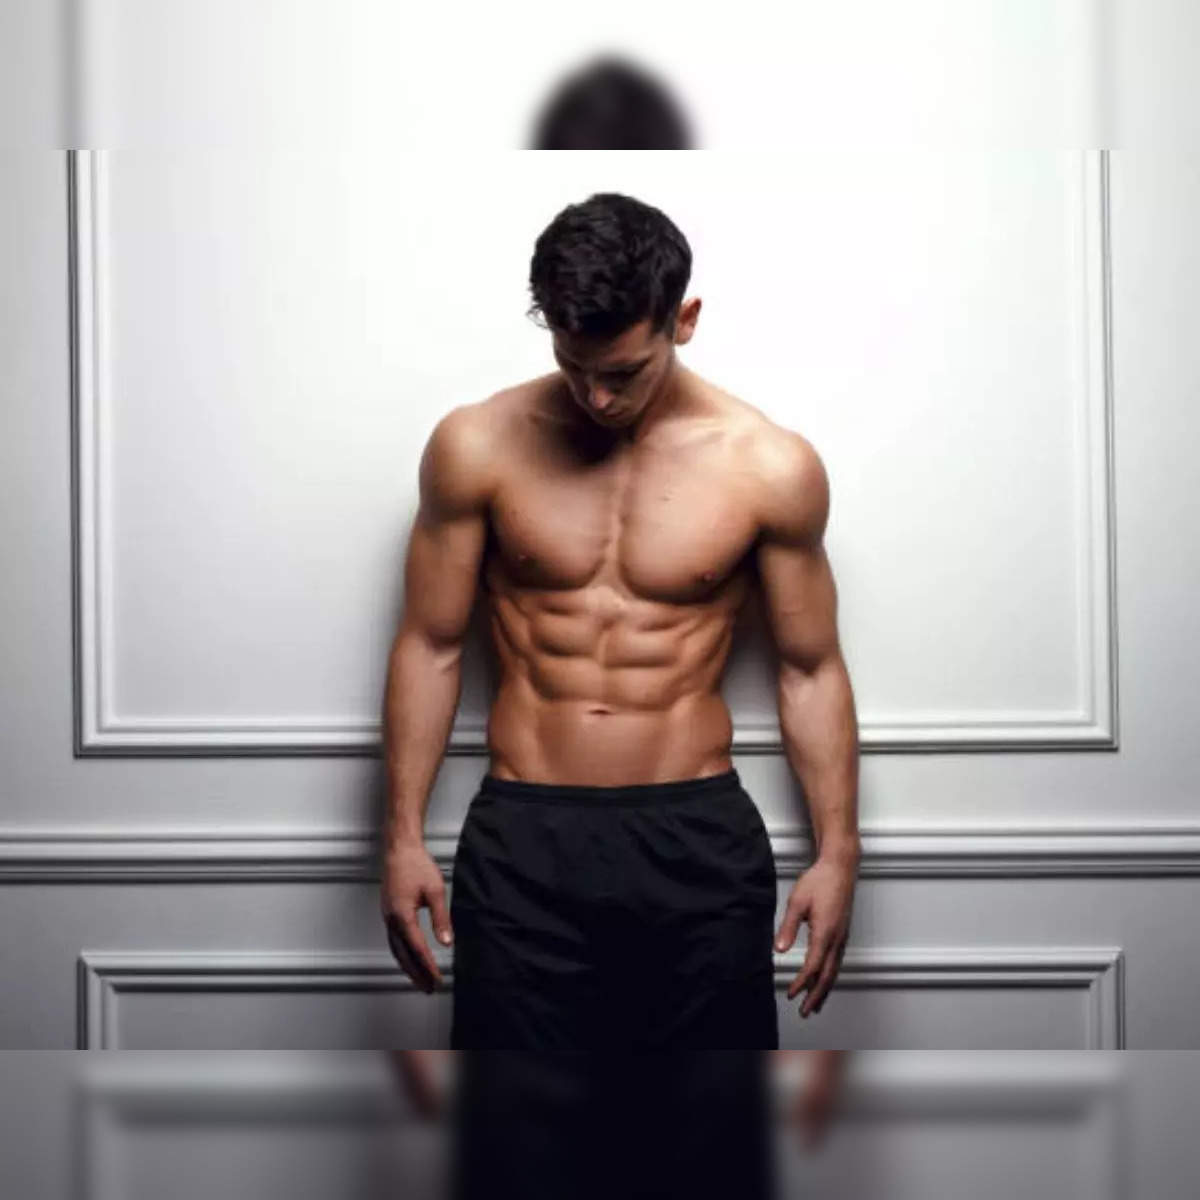 Six Pack Abs- It's All About Diet